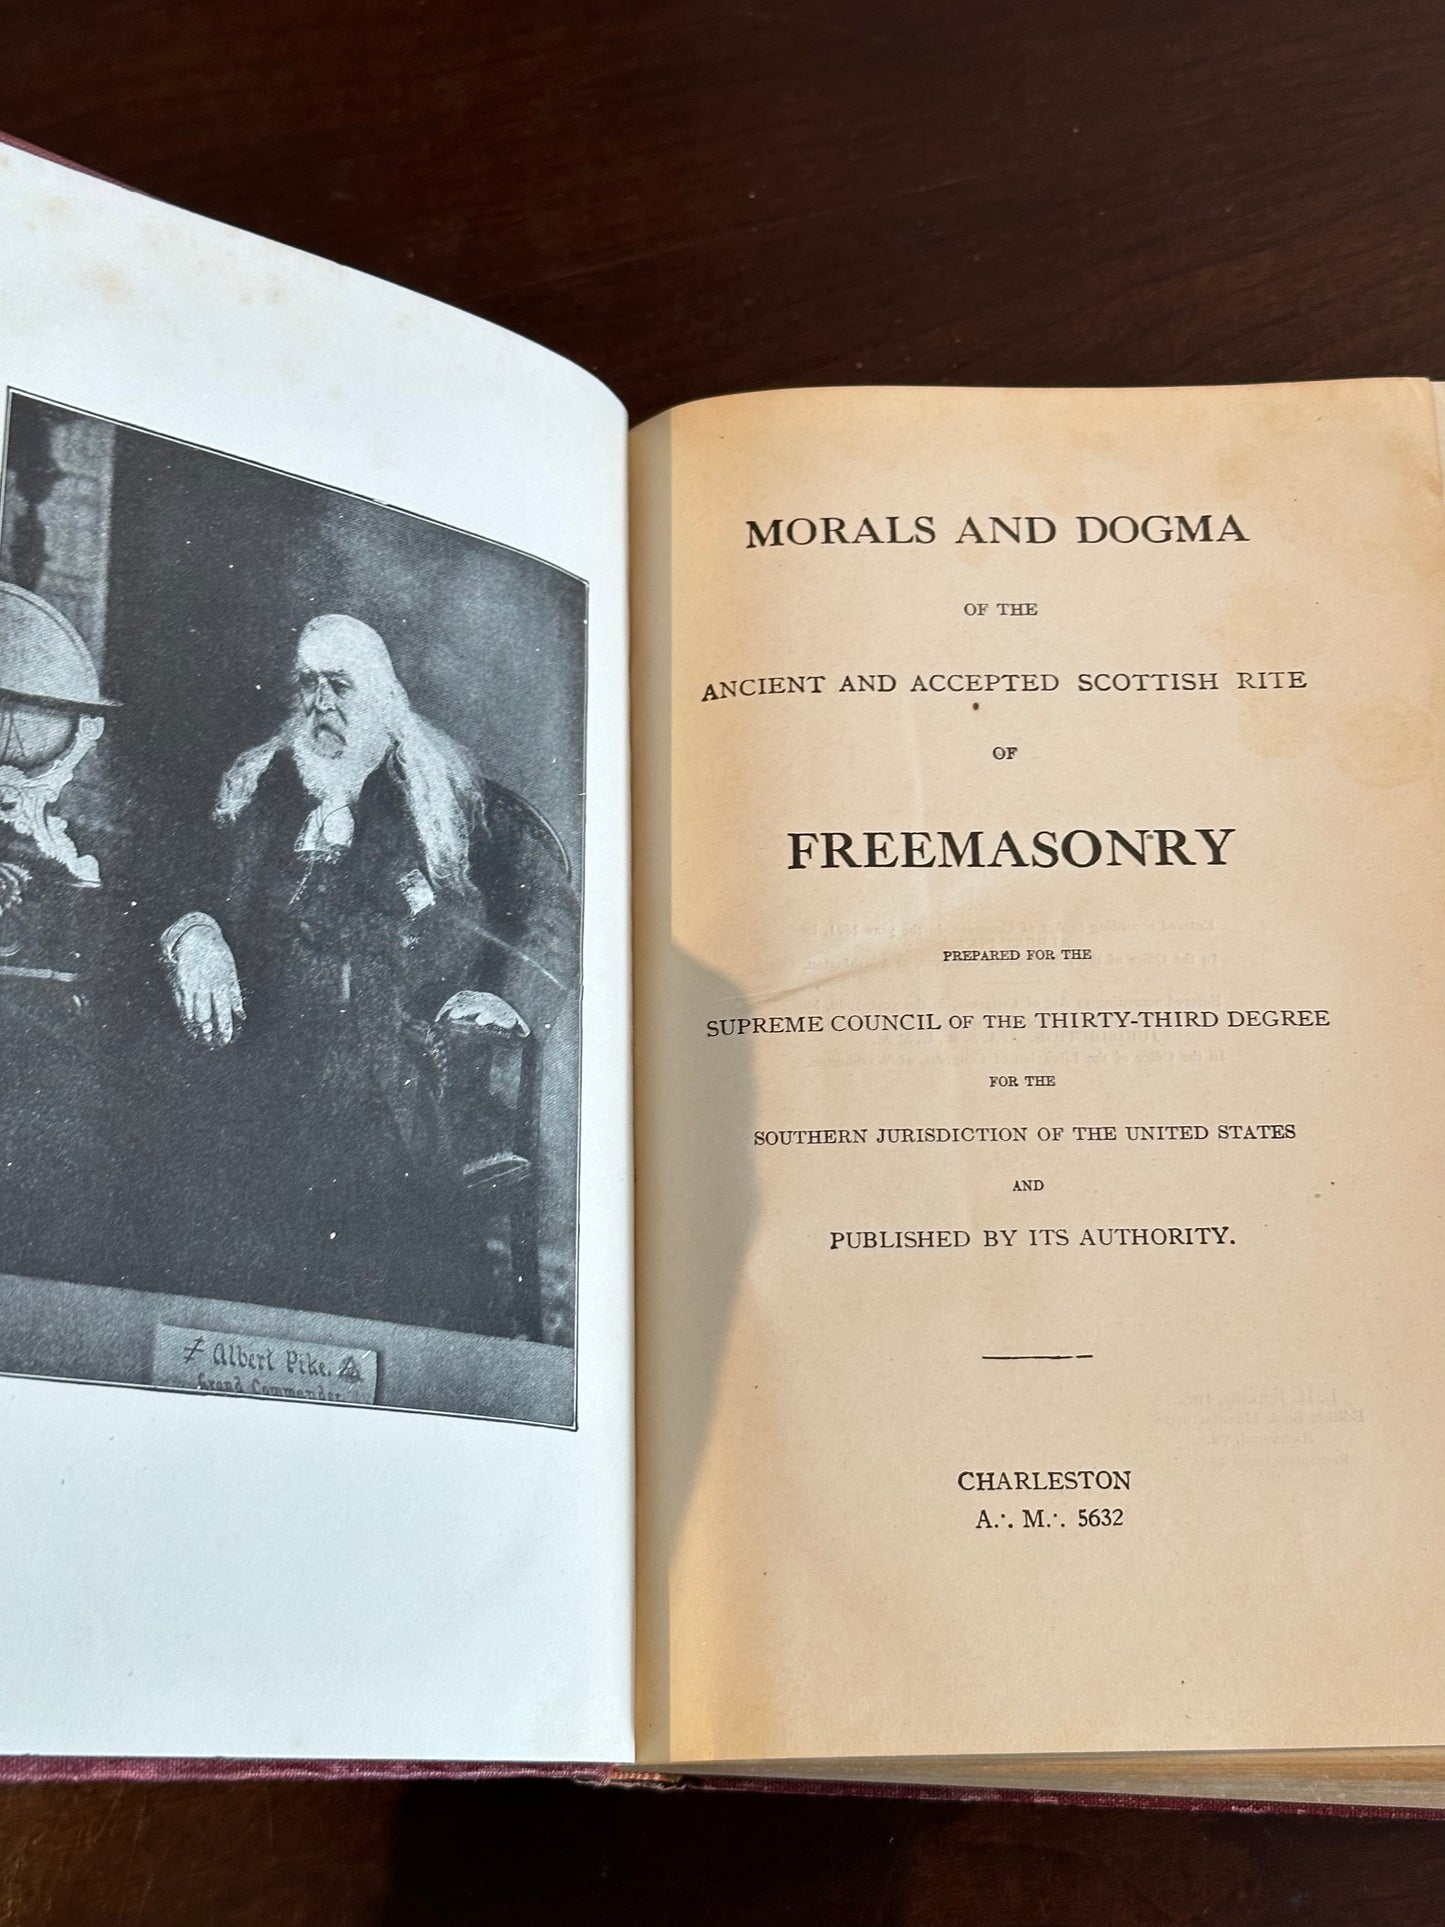 Morals and Dogma by Albert Pike